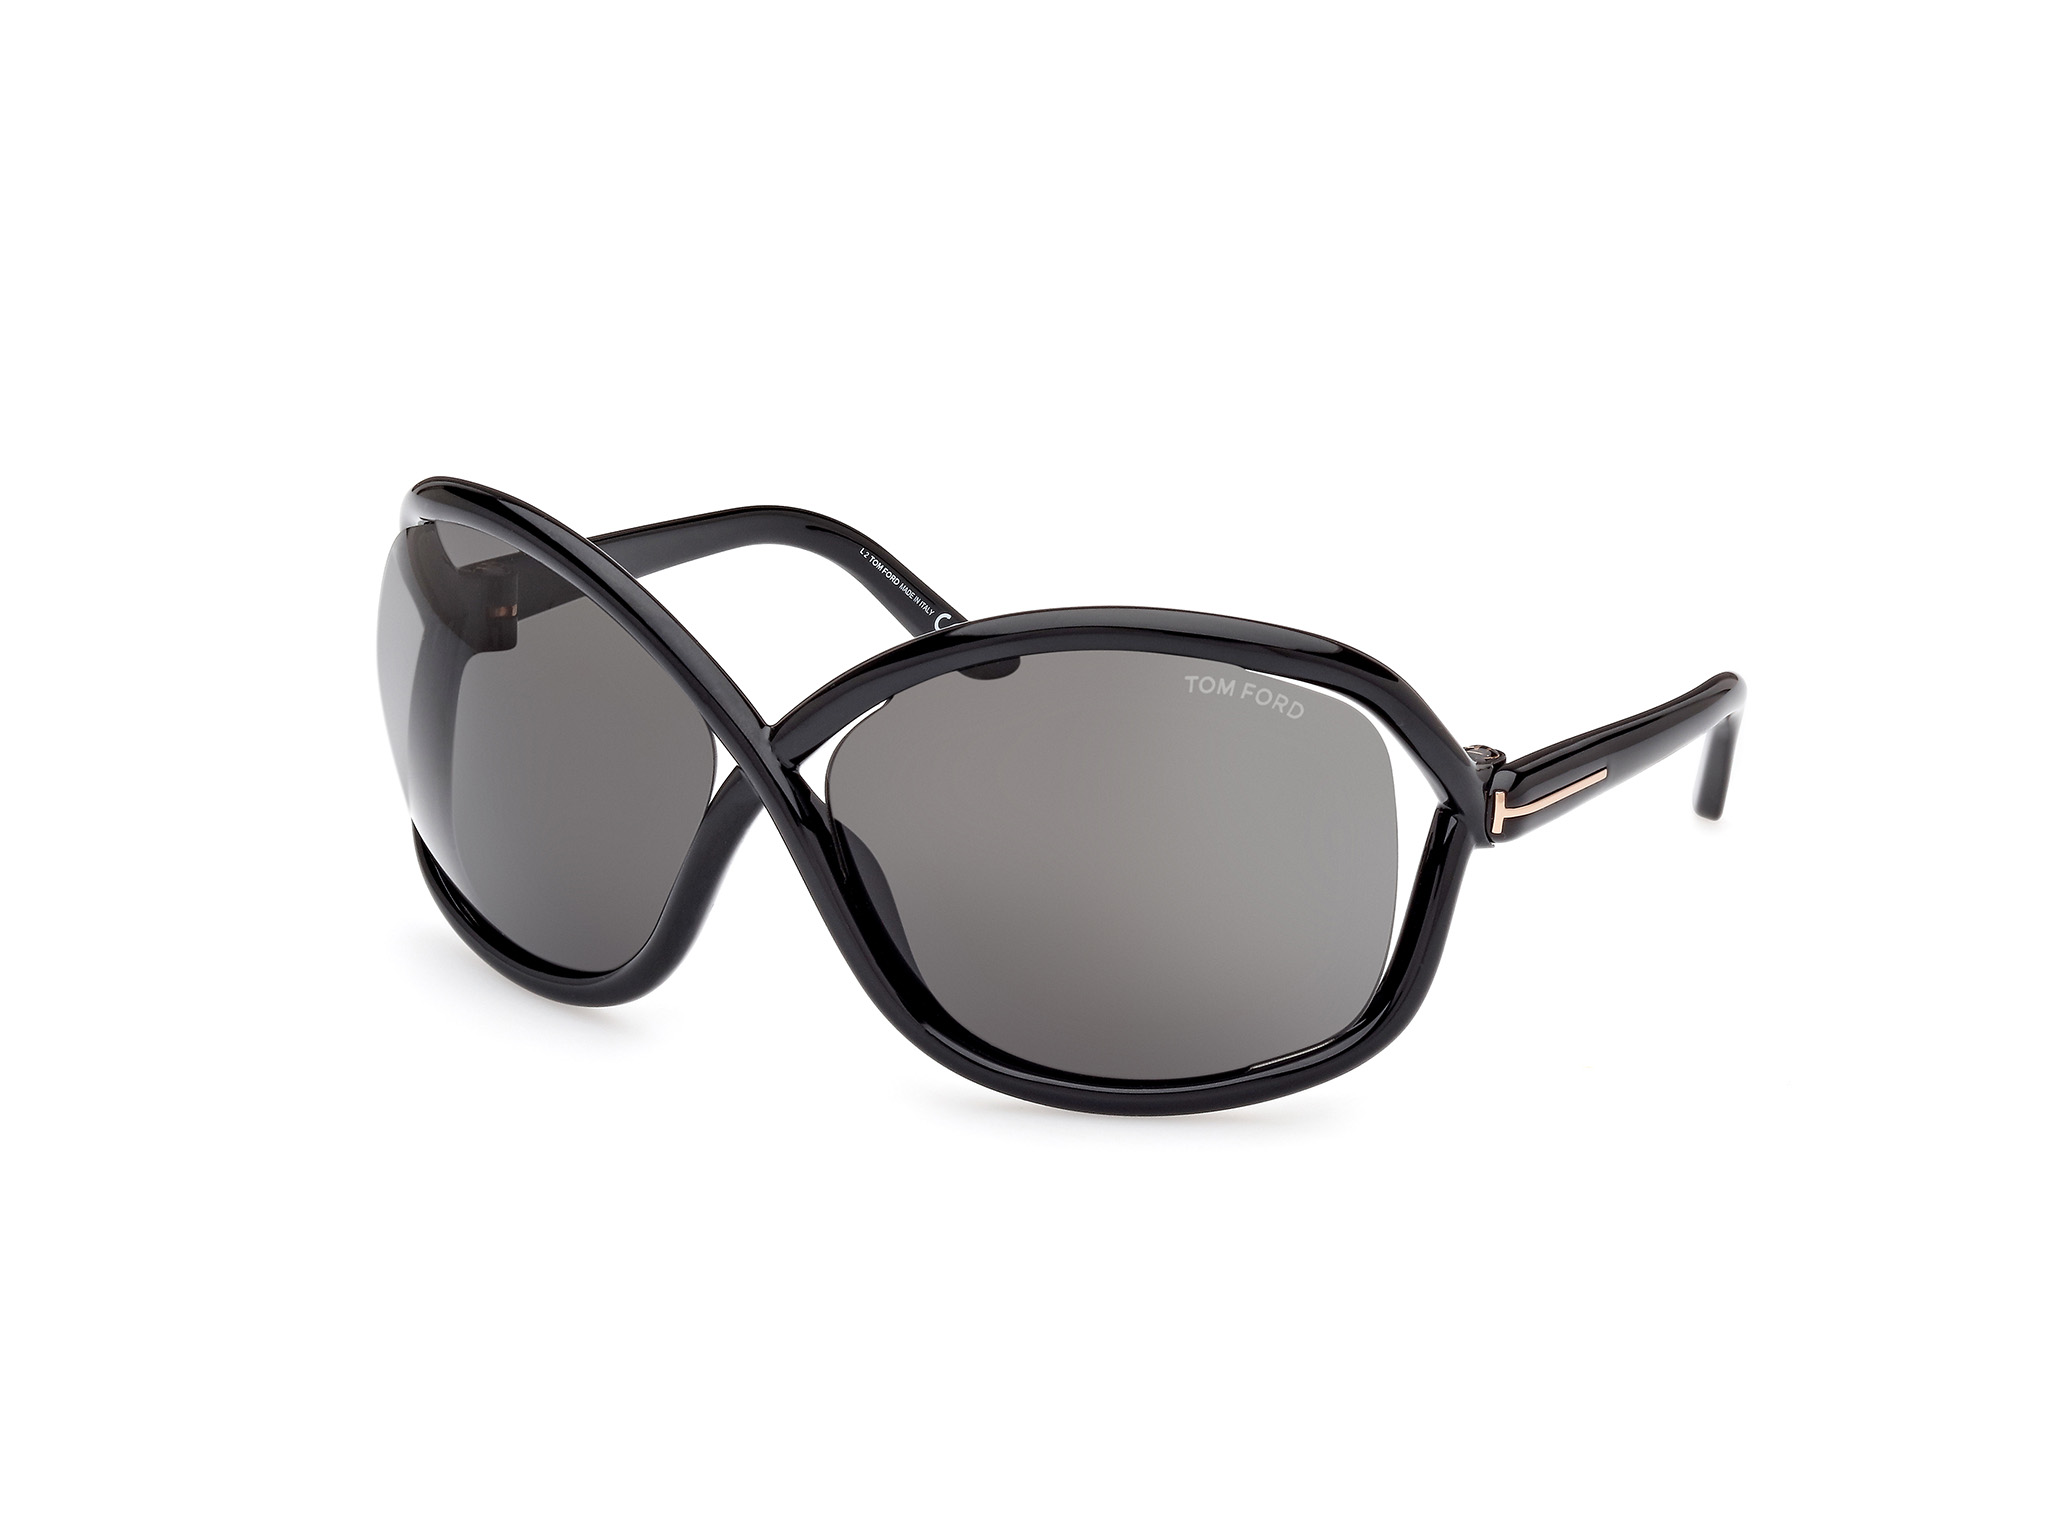 Tom Ford FT1068 01A Bettina 